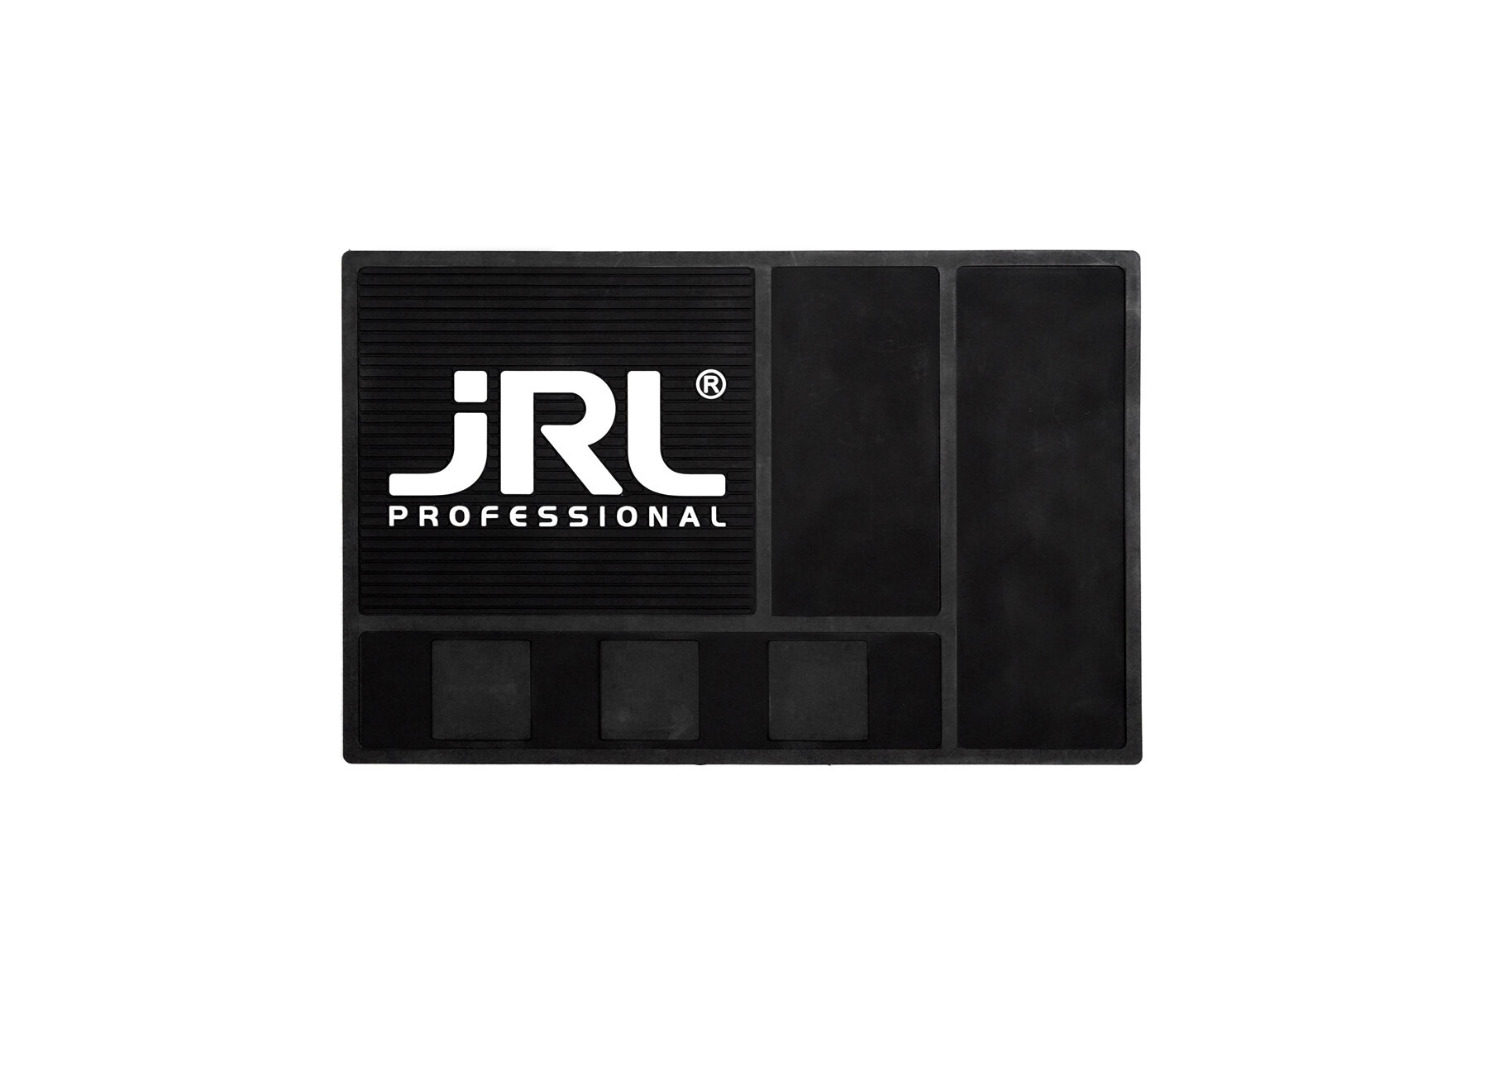 JRL Small Magnetic Stationary Mat 1st Gen - Fits 3 clippers